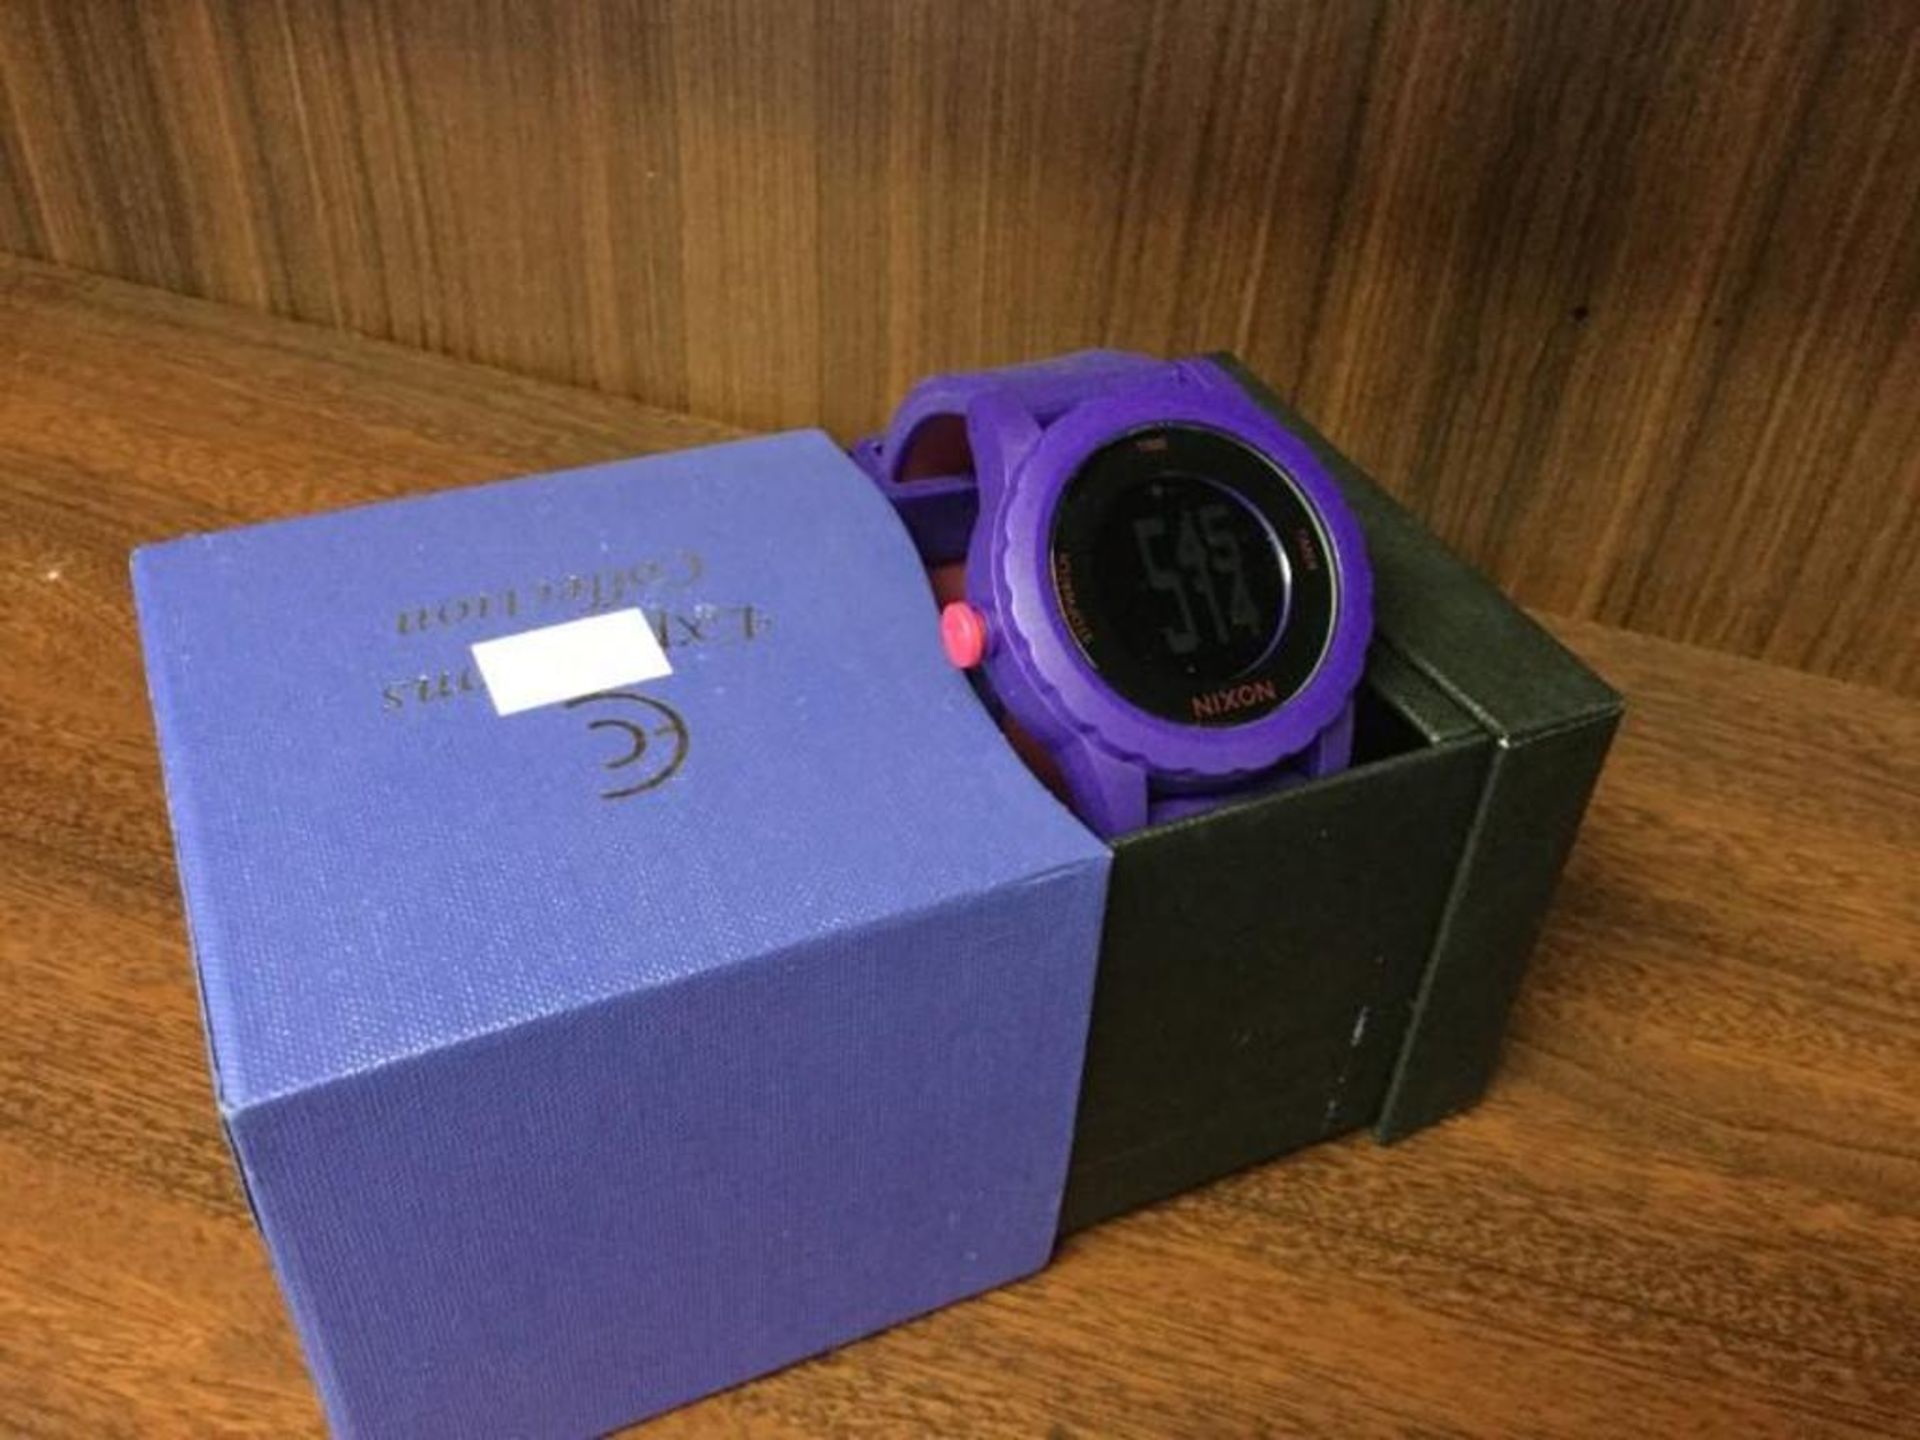 Nixon Watch - Purple band and face case